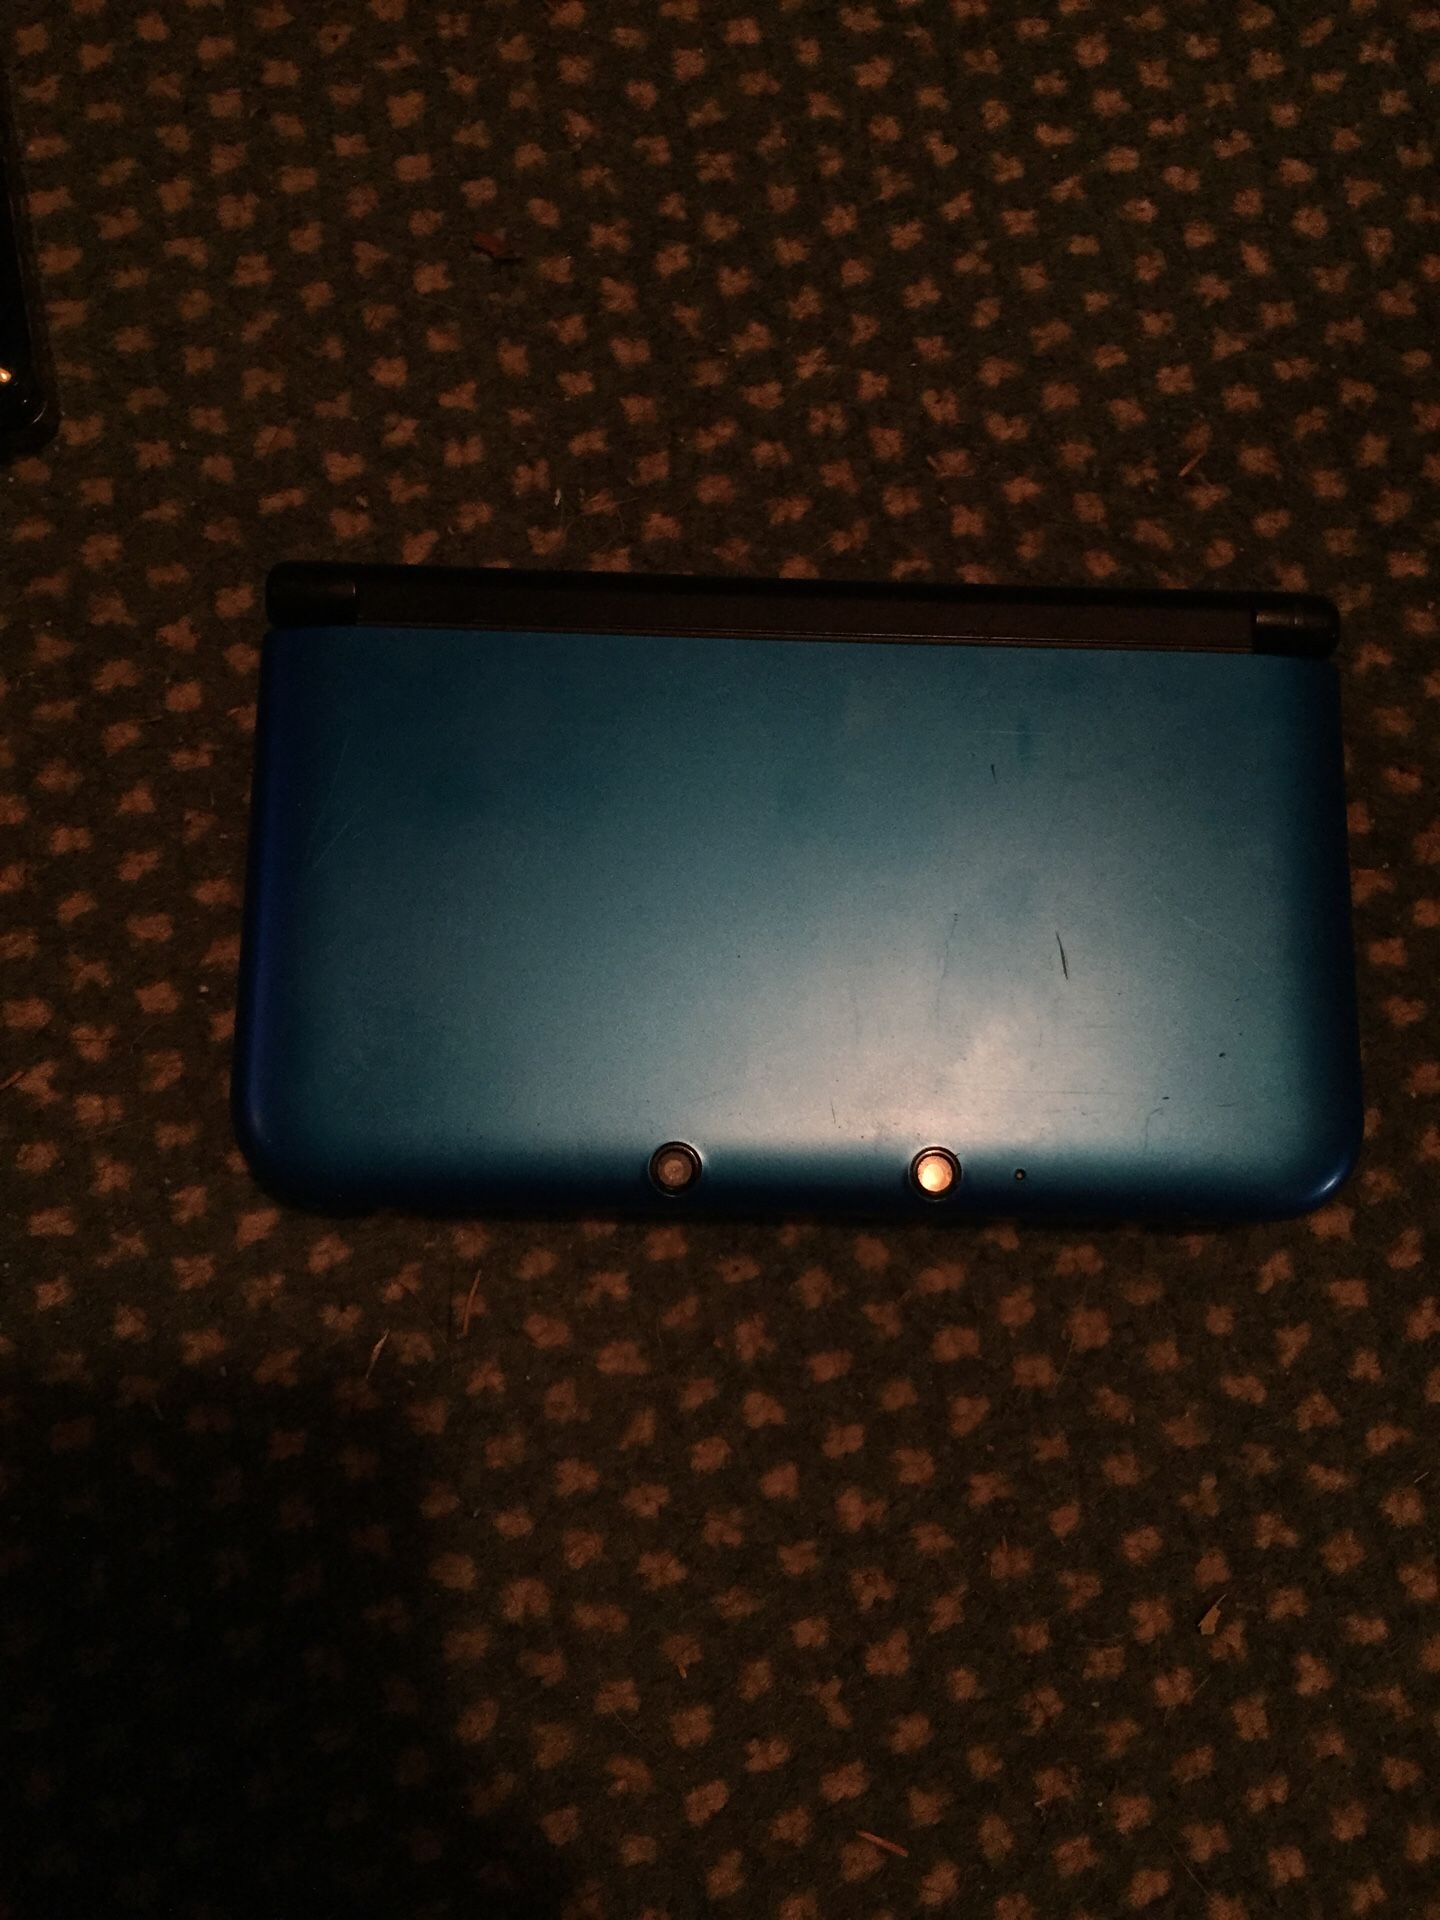 Nintendo 3DS XL w/charger